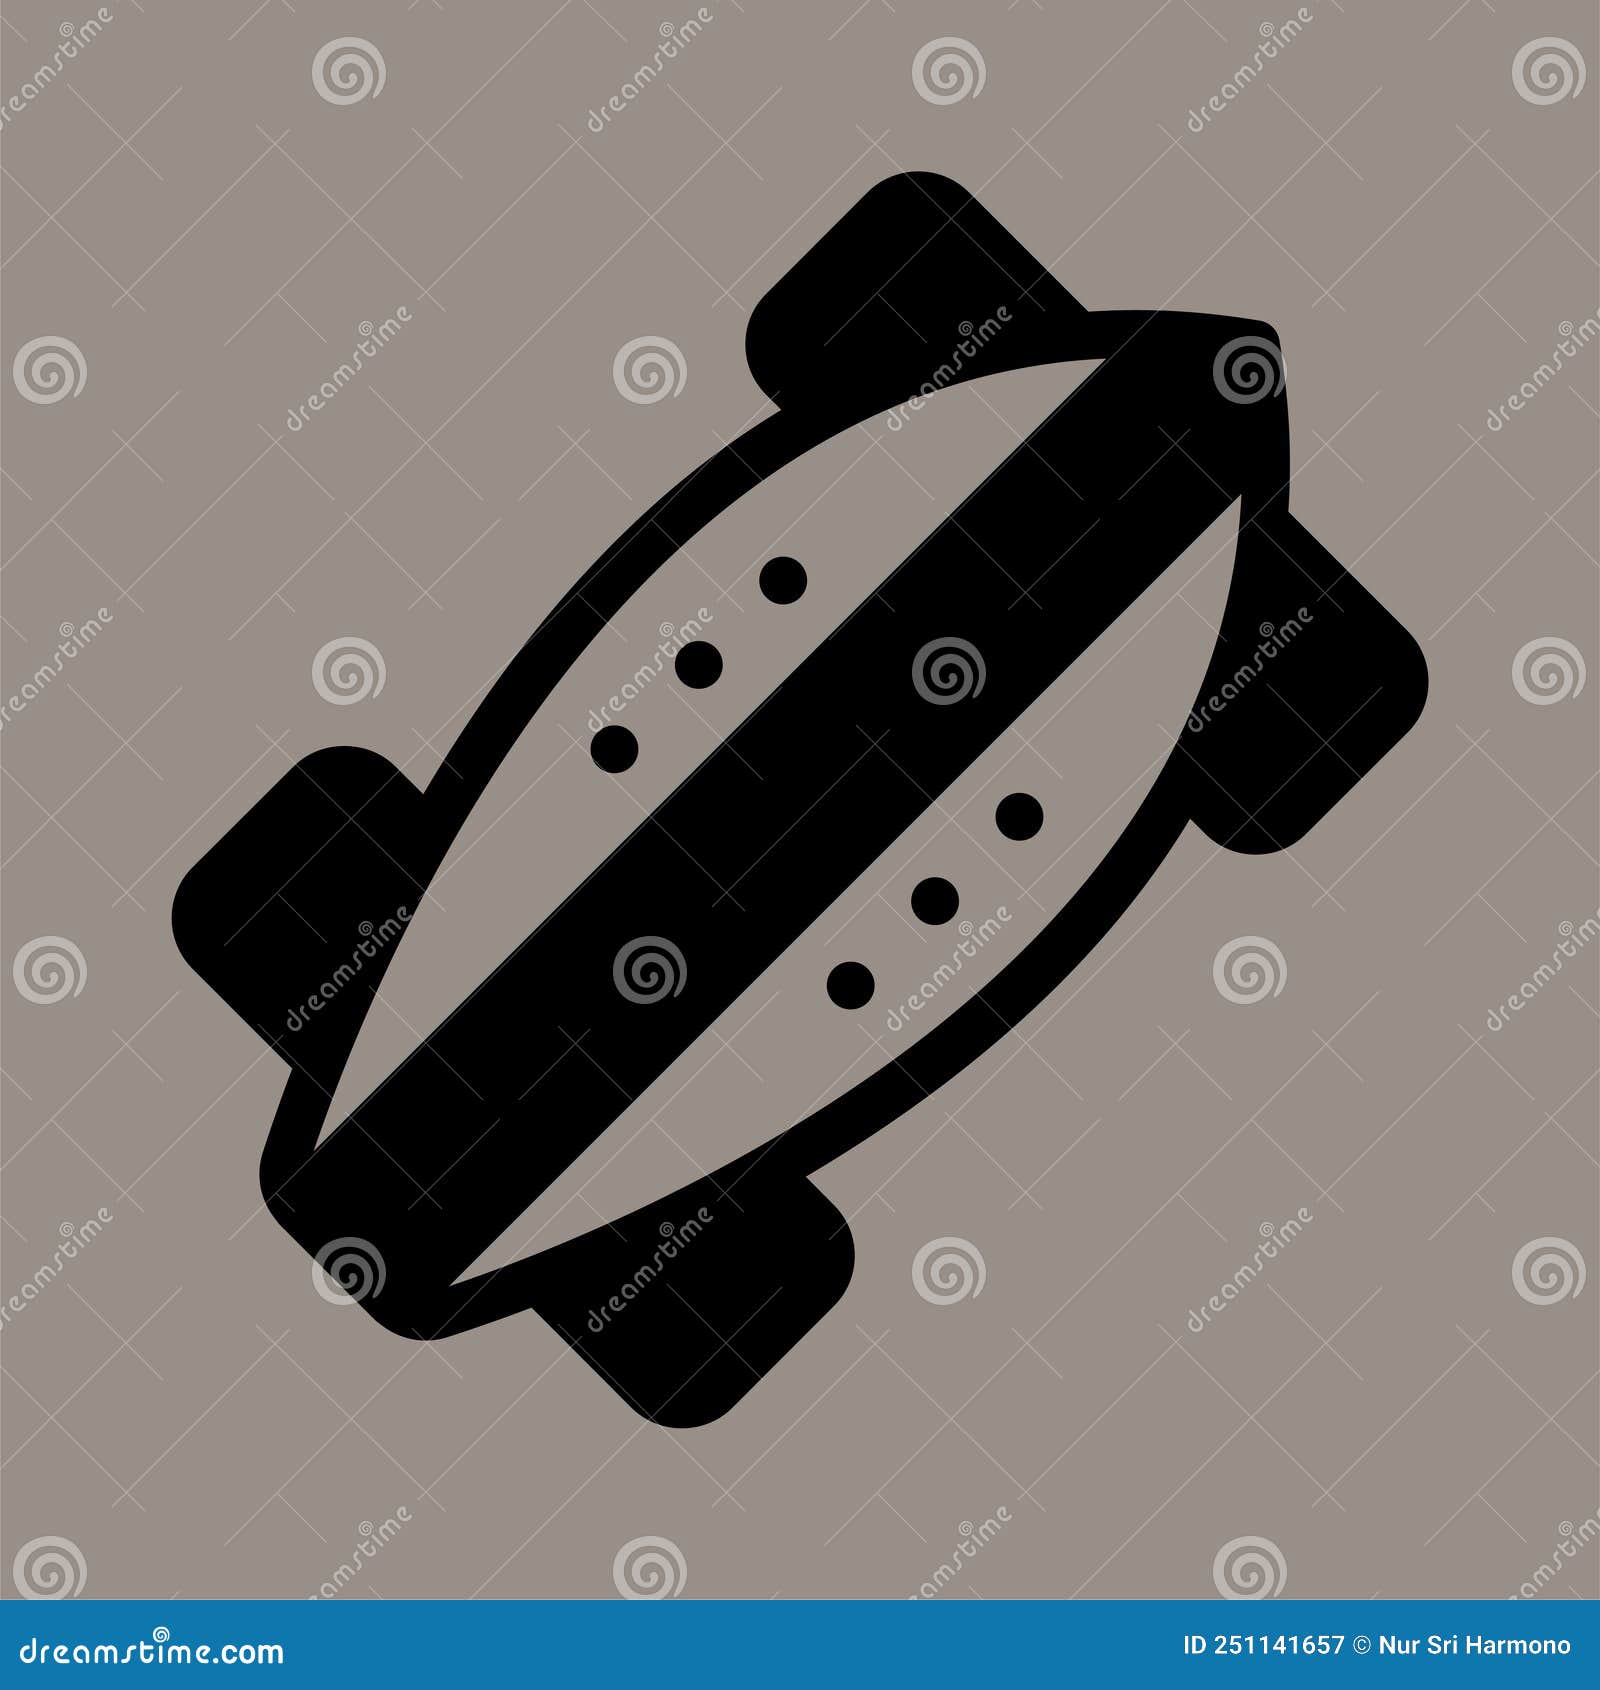 Icon, logo, vector illustration of a longboard isolated on gray background. suitable for sports, vehicles, patterns and logos.